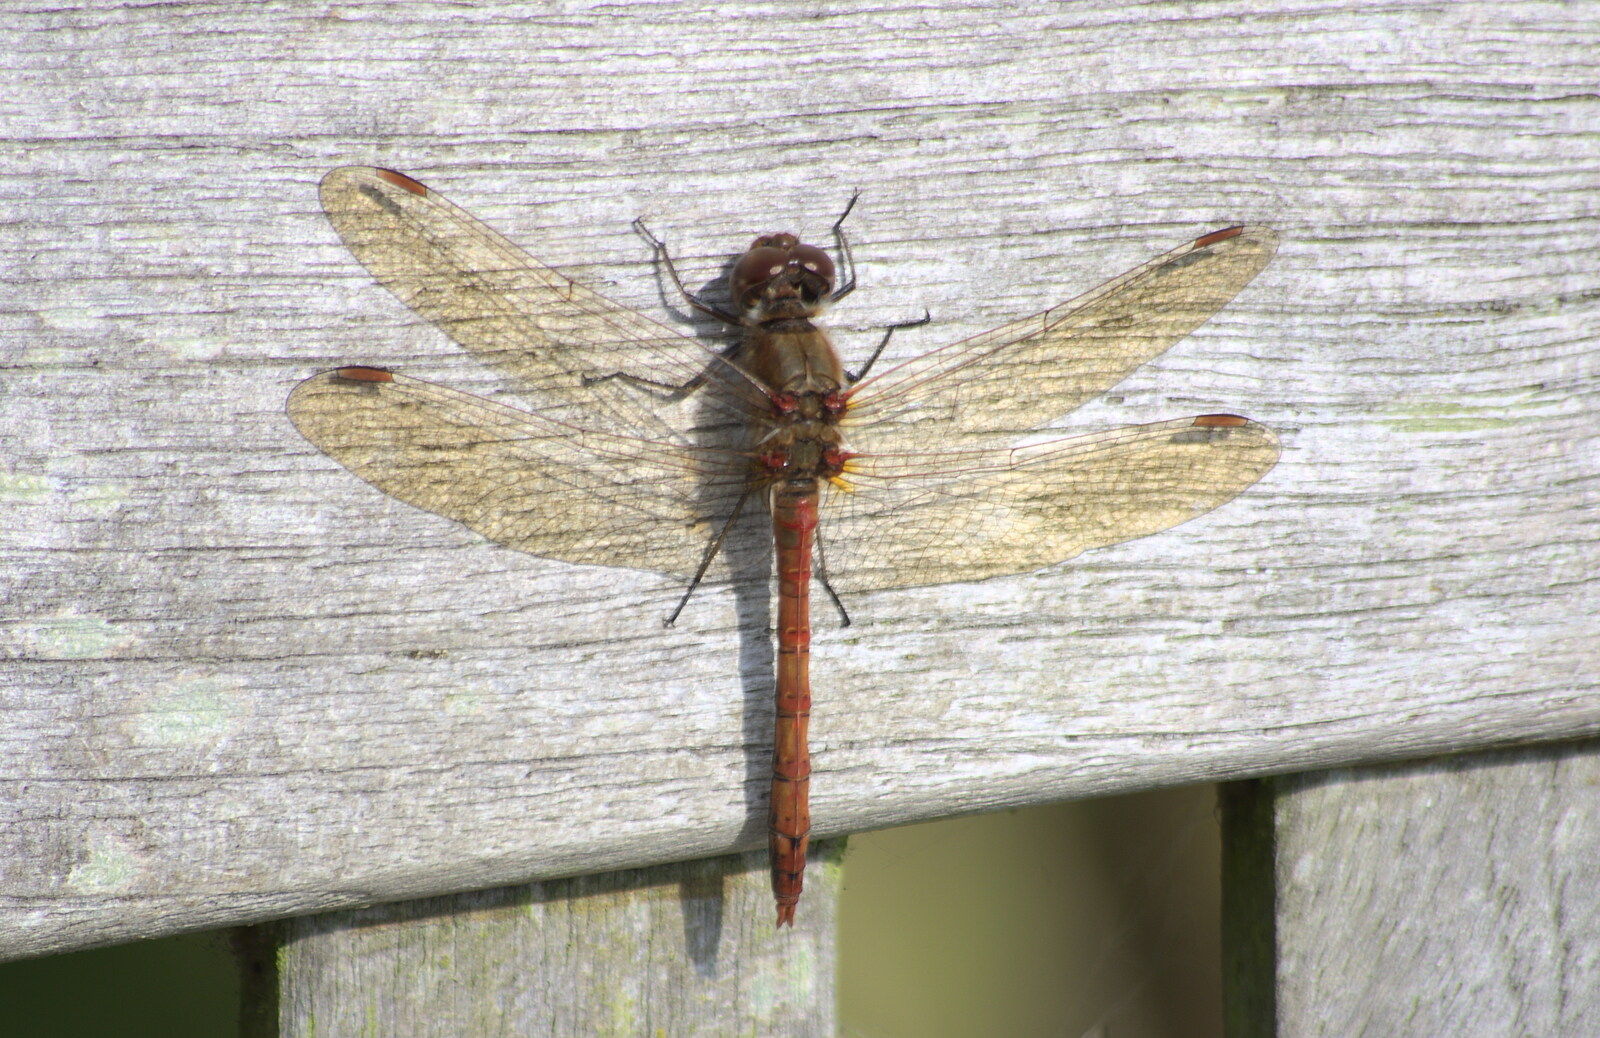 A big dragonfly lands on the bench from A Trip to Waxham Sands,  Horsey, Norfolk - 27th August 2016